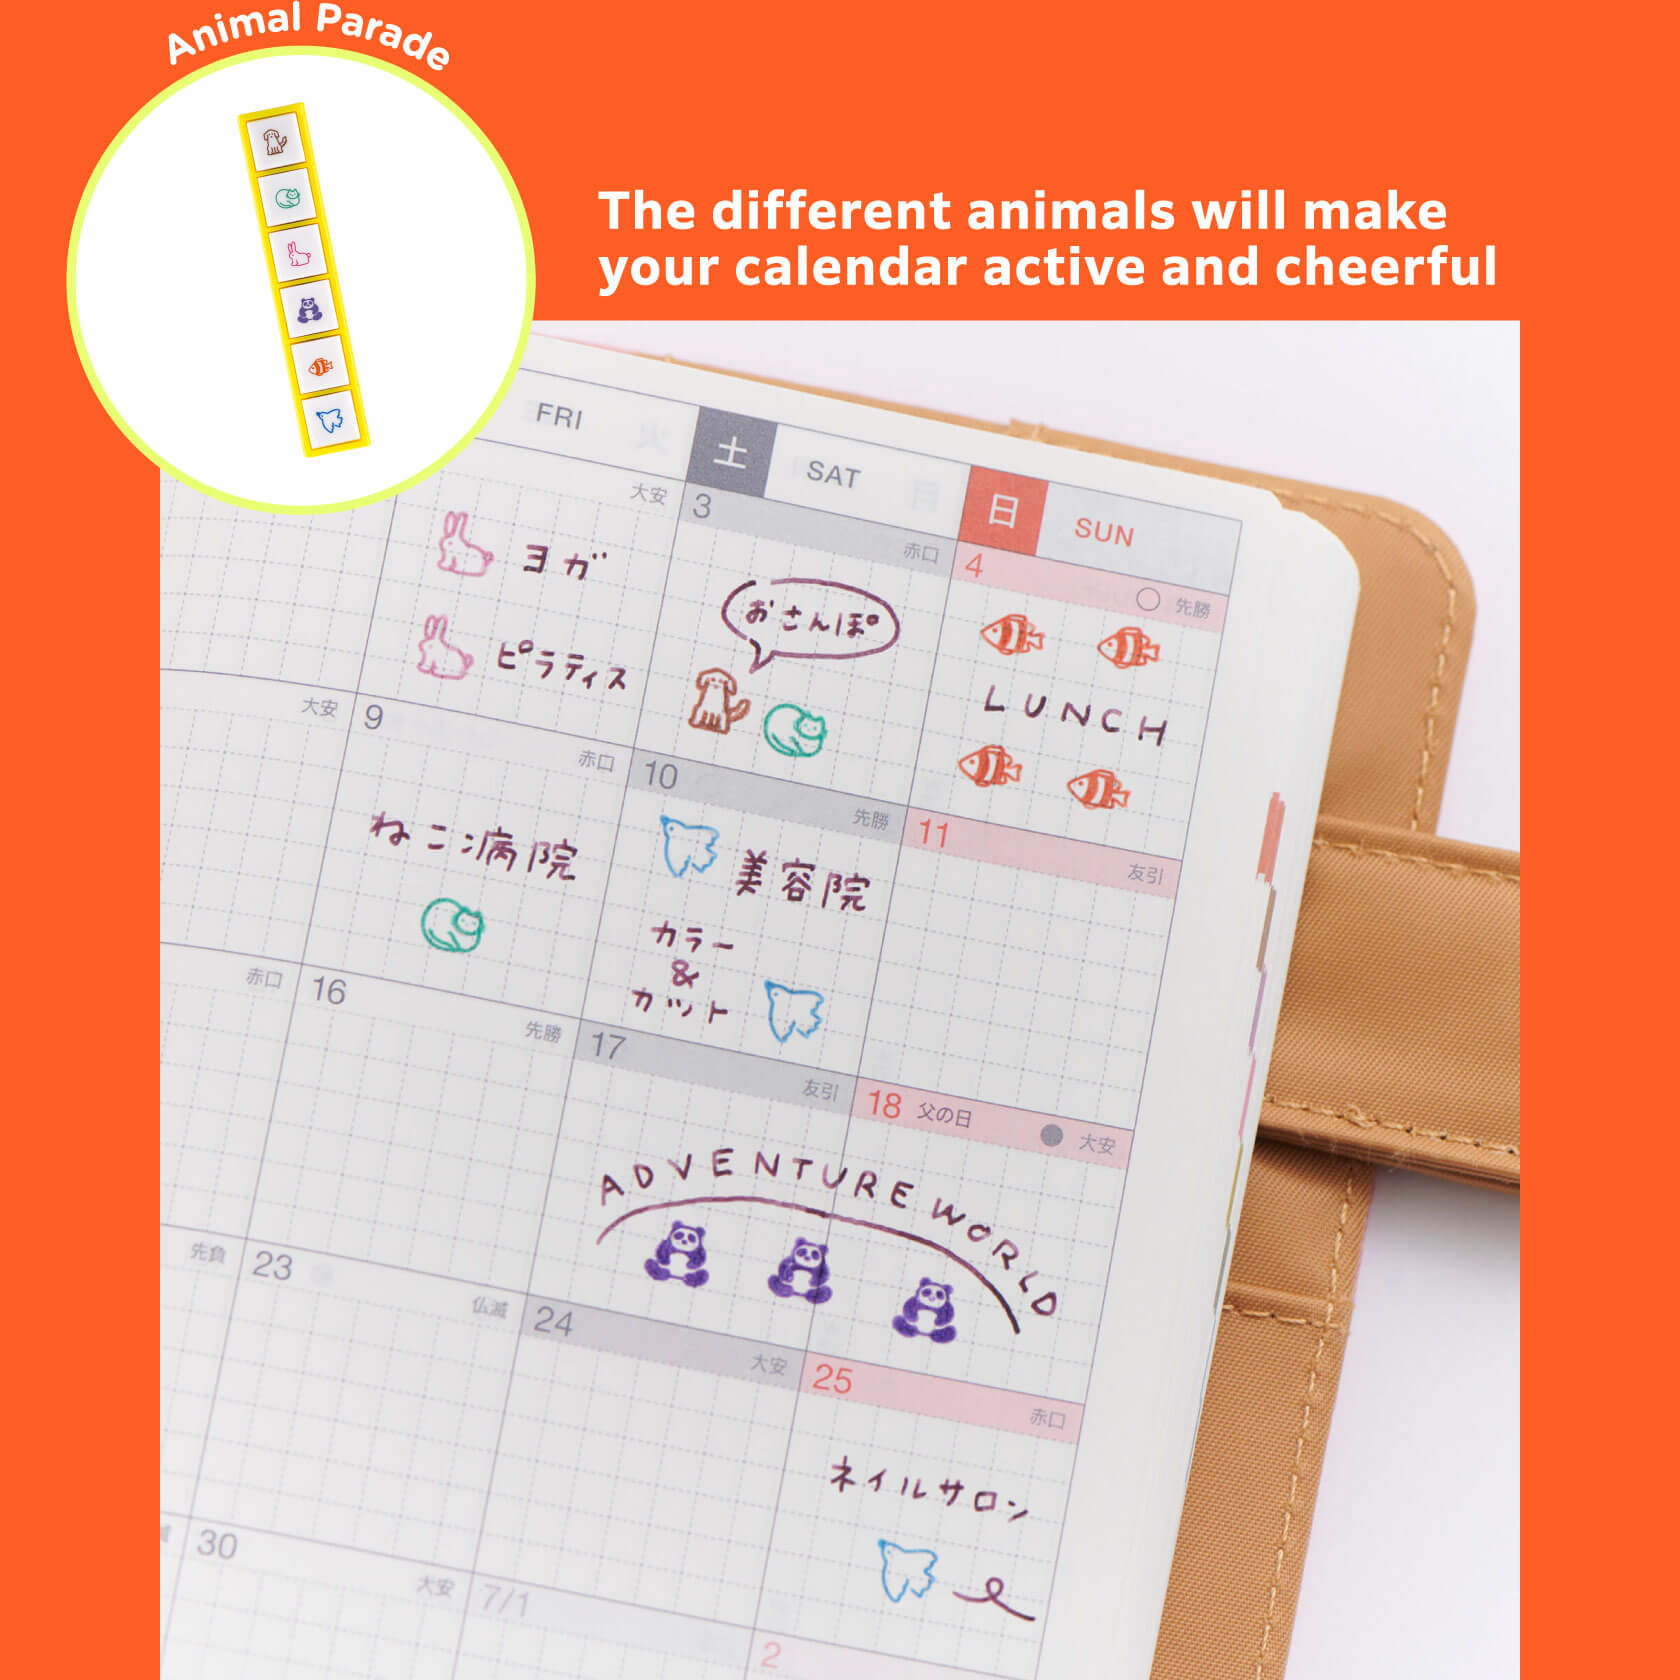 Usage Example (Animal Parade)
                      The different animals will make your calendar active and cheerful